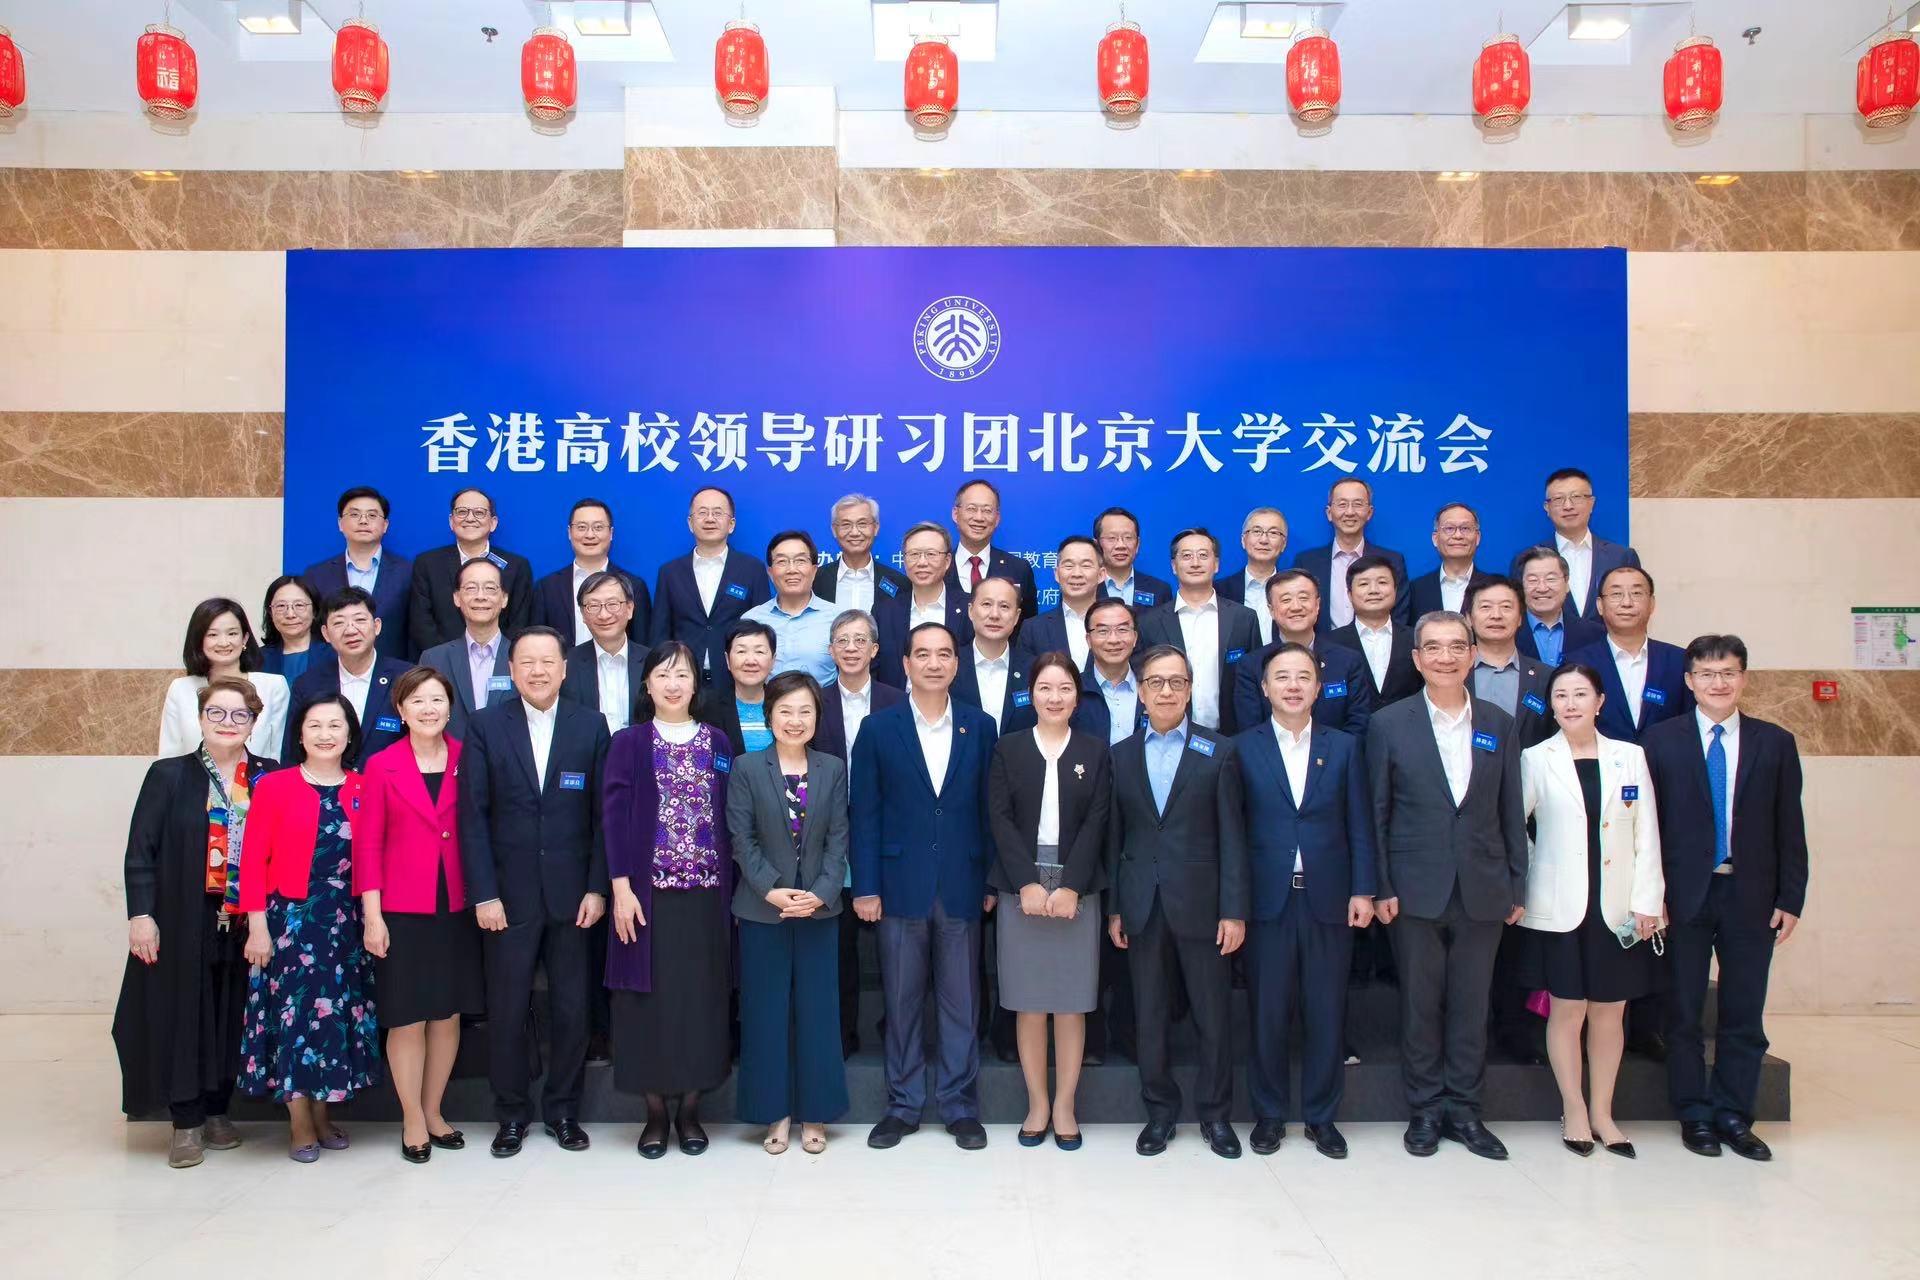 The Secretary for Education, Dr Choi Yuk-lin, is leading a delegation of Hong Kong higher education institutions to visit Beijing for two consecutive days (May 8 and 9). They visited Peking University today (May 9). Photo shows Dr Choi (front row, sixth left), the Permanent Secretary for Education, Ms Michelle Li (front row, fifth left), and other members of the delegation with the President of Peking University, Mr Gong Qihuang (front row, centre), Deputy Director of the Liaison Office of the Central People's Government in the Hong Kong Special Administrative Region Ms Lu Xinning (front row, sixth right), and representatives of the universities of Beijing of the Beijing-Hong Kong Universities Alliance.
